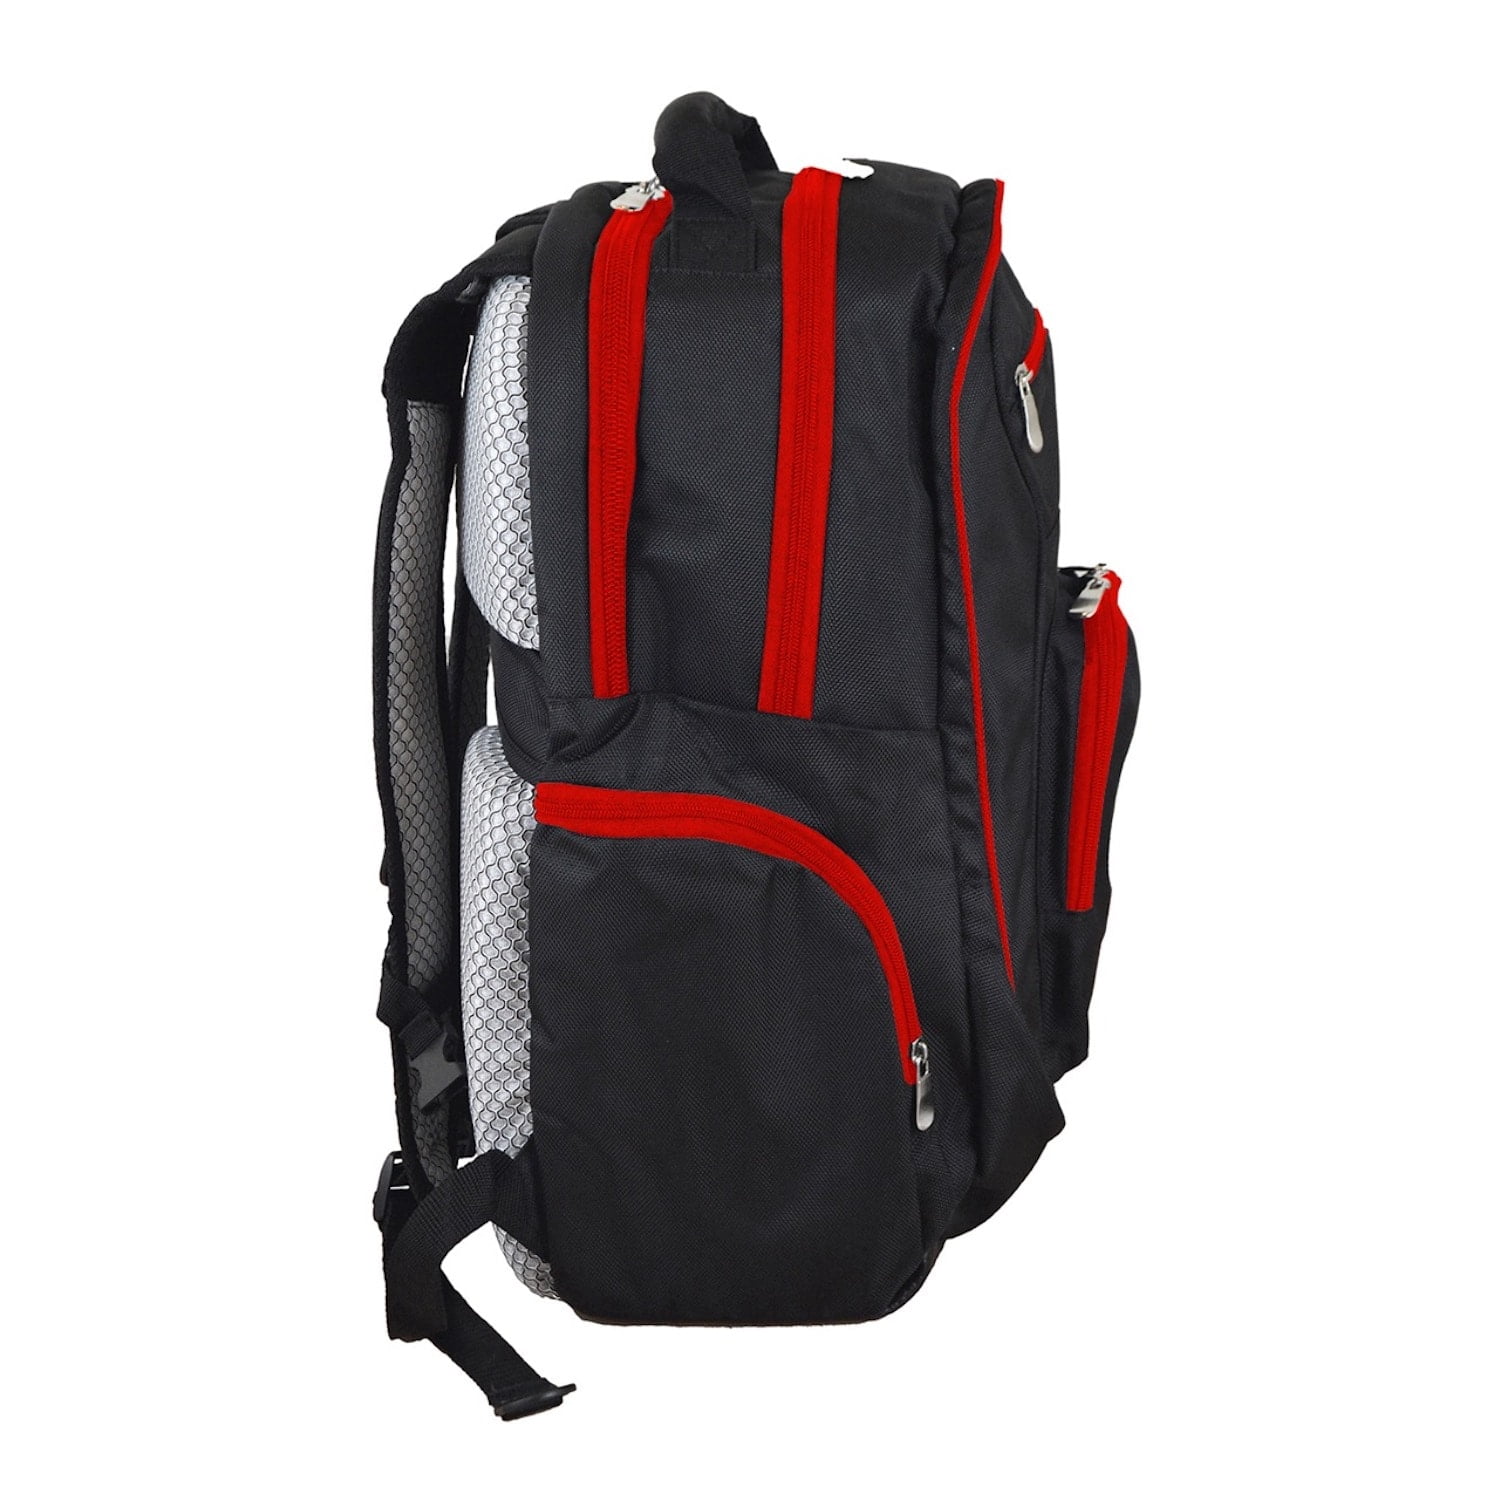 MLB St Louis Cardinals Premium Laptop Backpack with Colored Trim